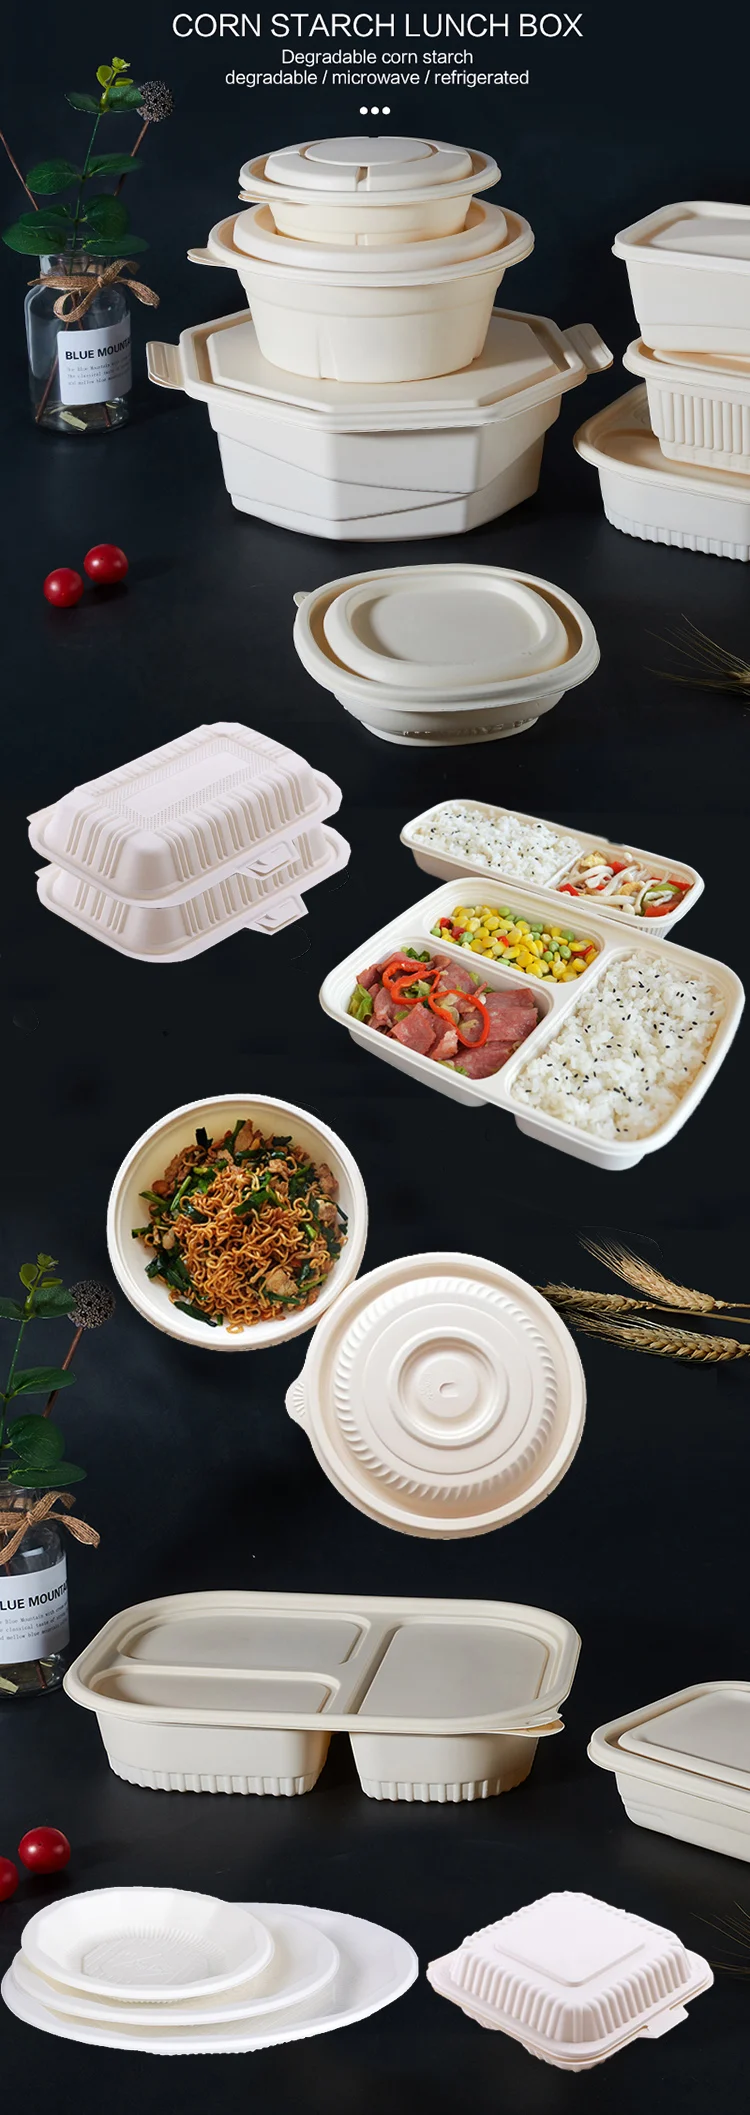 Wedding Disposable Plates 9 Inch Dinner Trays